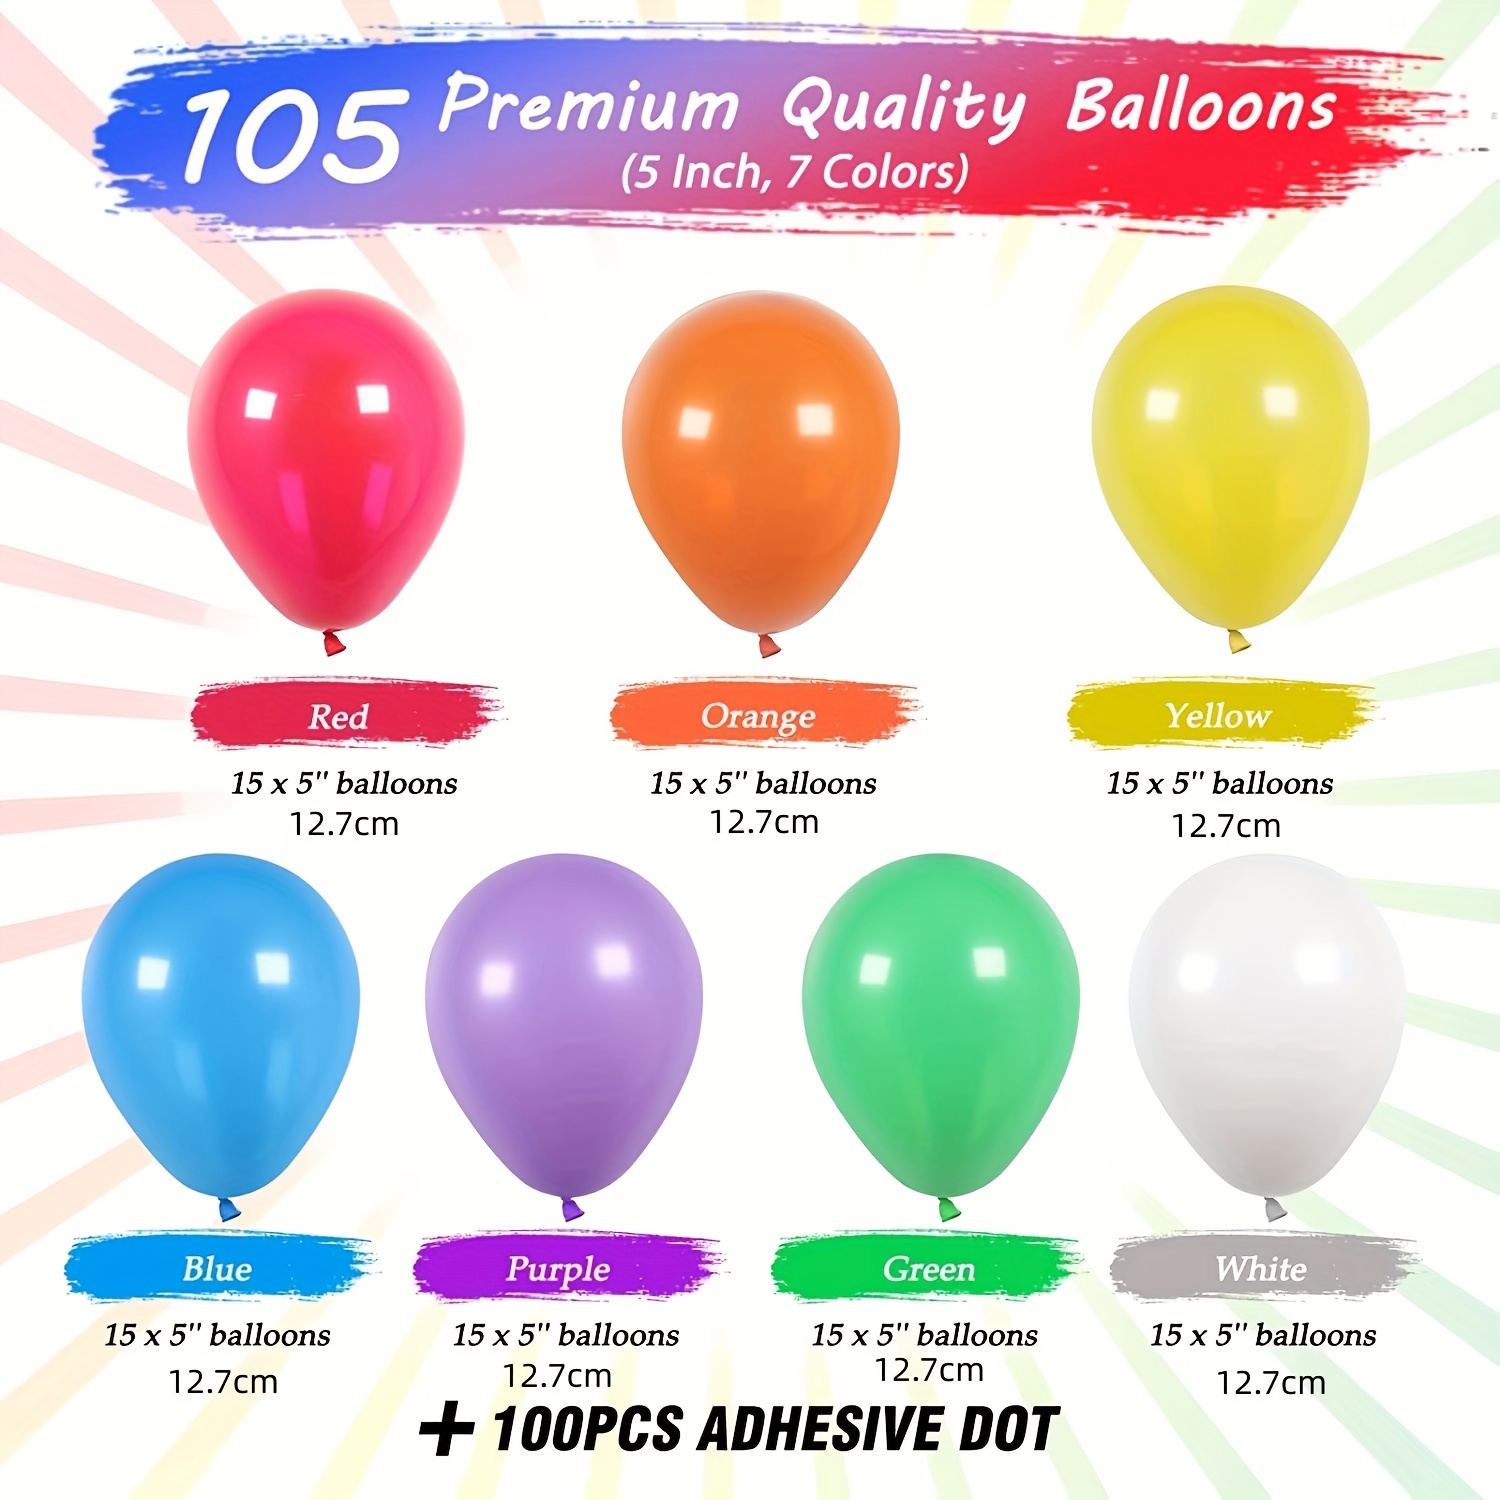  105PCS Colorful Balloons Assorted Colors, 10 Inches Bright  Colors Rainbow Party Balloon for Birthday Party Baby Shower Wedding Party  Rainbow Balloons : Toys & Games